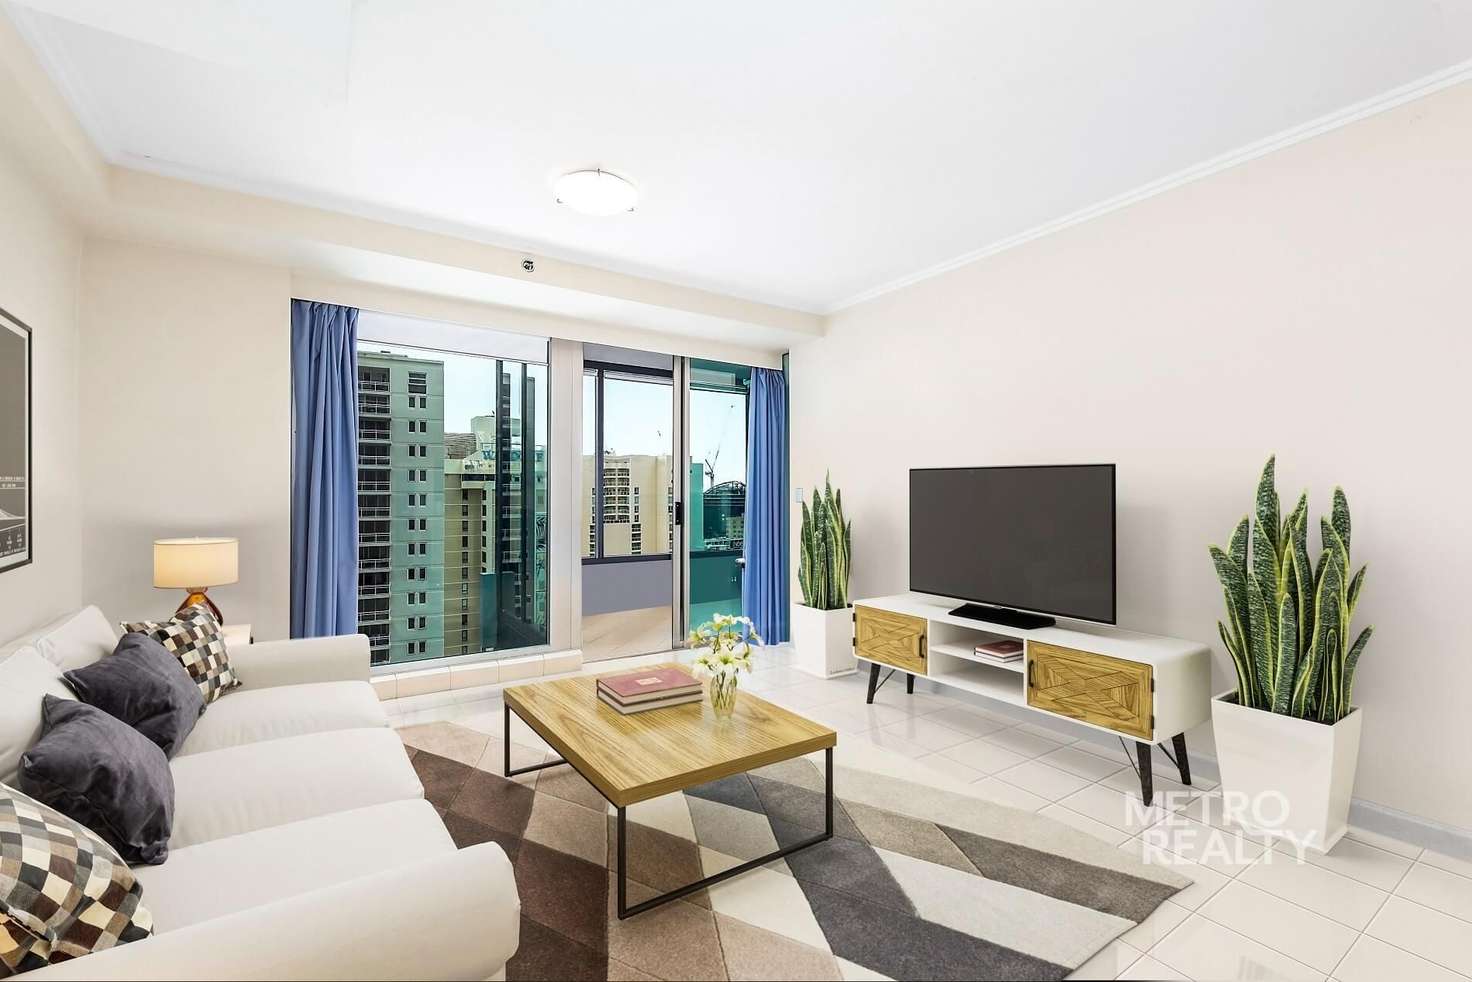 Main view of Homely apartment listing, 2805/91 Liverpool St, Sydney NSW 2000